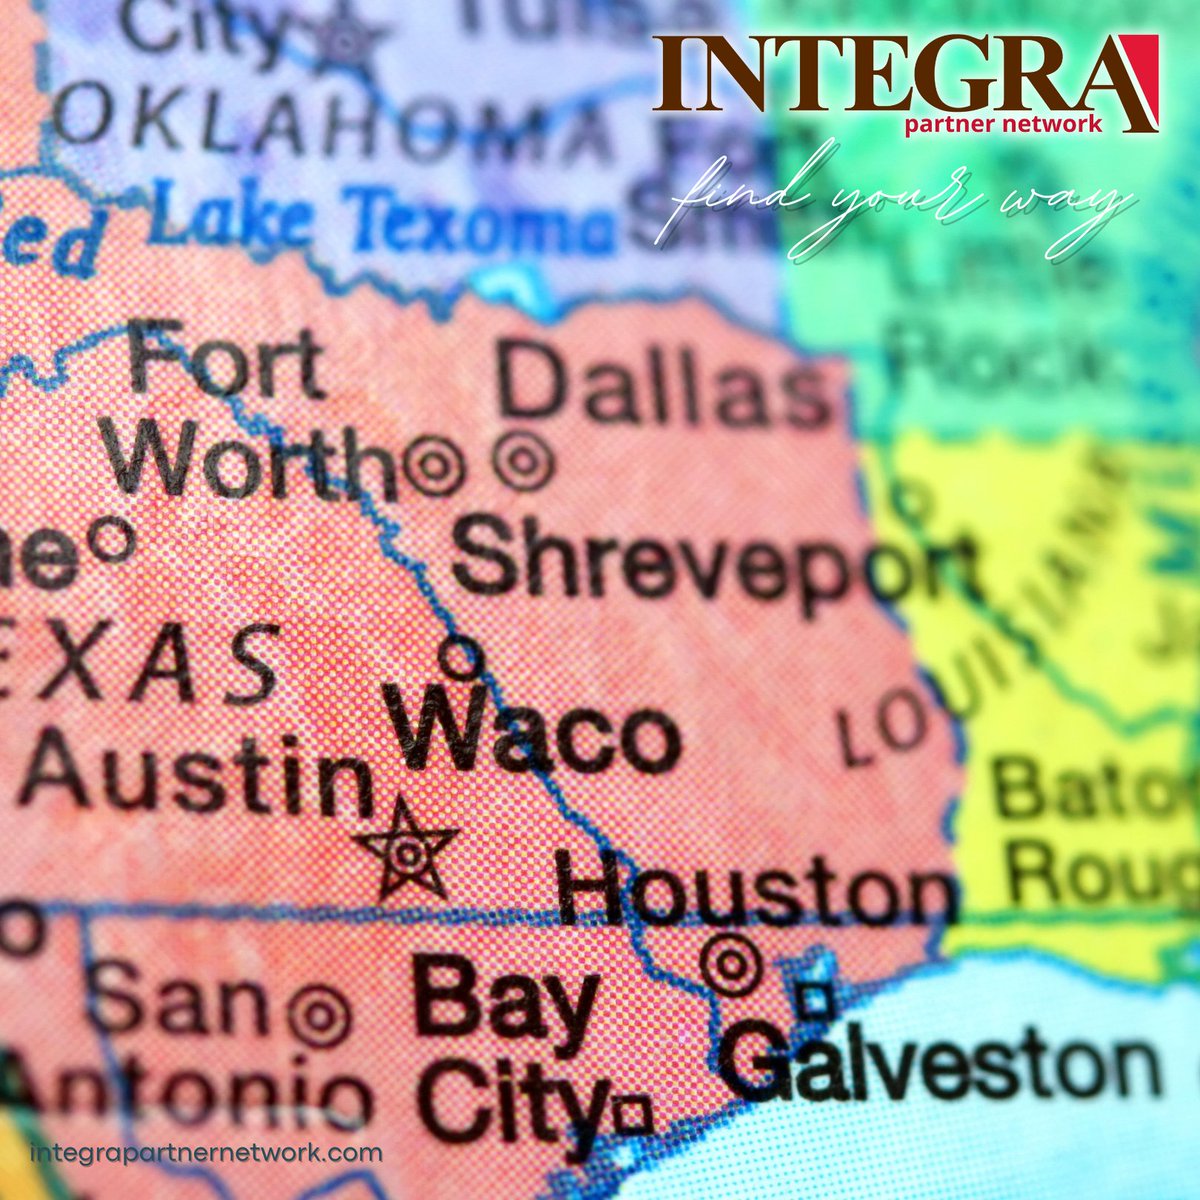 Ready to show the world your Texas entrepreneurial spirit with an independent insurance agency? Find your way to the Integra Partner Network. 

#independentagent #insurance #independentagency #integra #integrapartnernetwork #insuranceagent #insuranceagency #entrepreneur #success